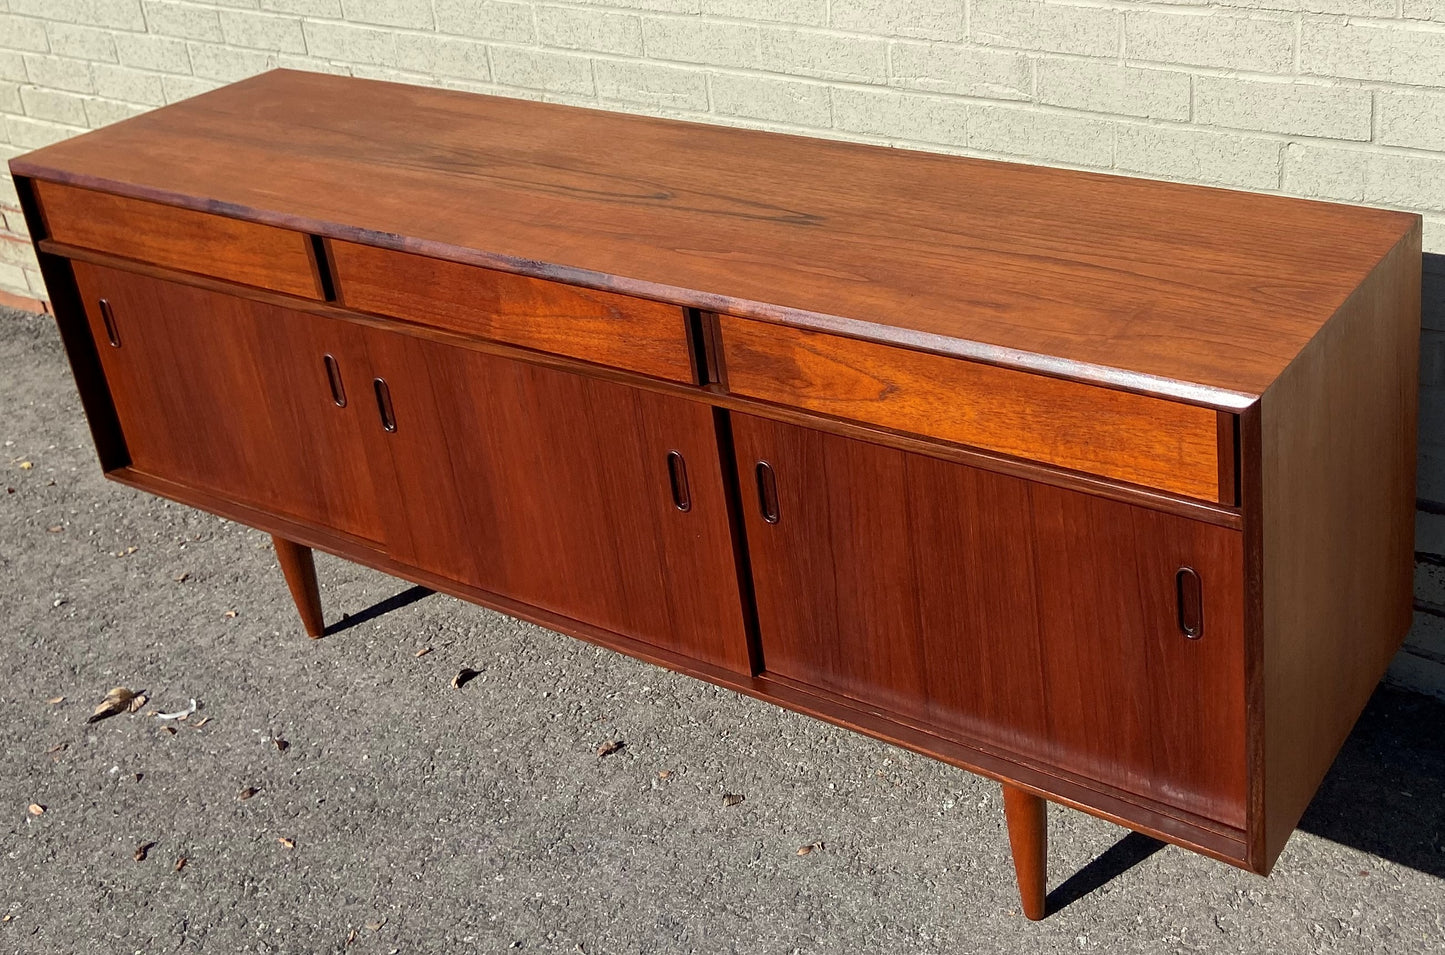 REFINISHED Mid Century Modern Teak Sideboard by Punch 72"